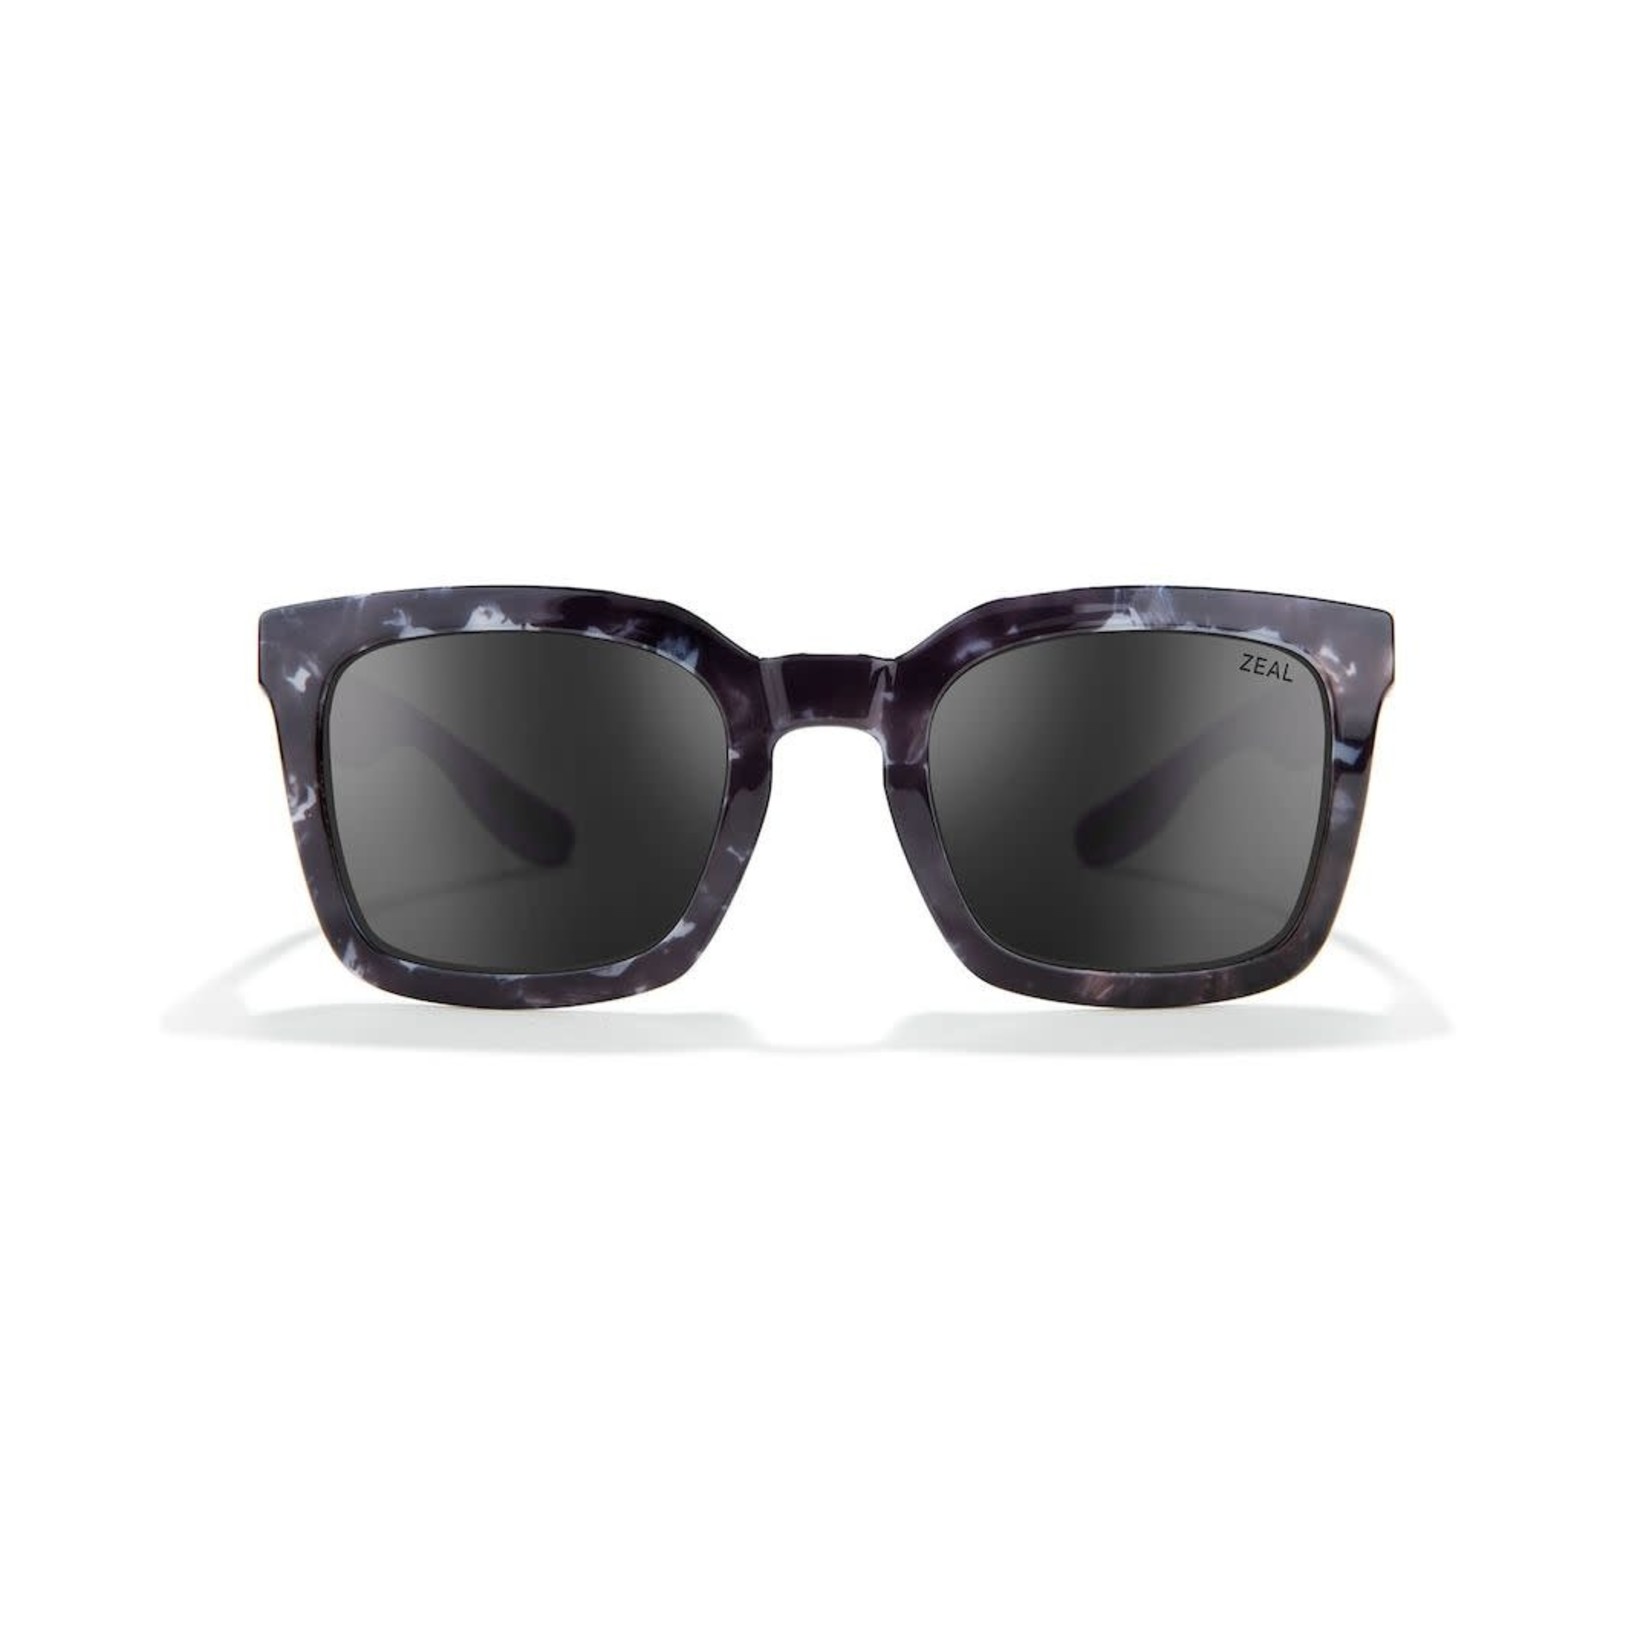 Zeal Zeal Lolo Sunglasses - Grey/Blue Marble - Attic Skate & Snow Shop